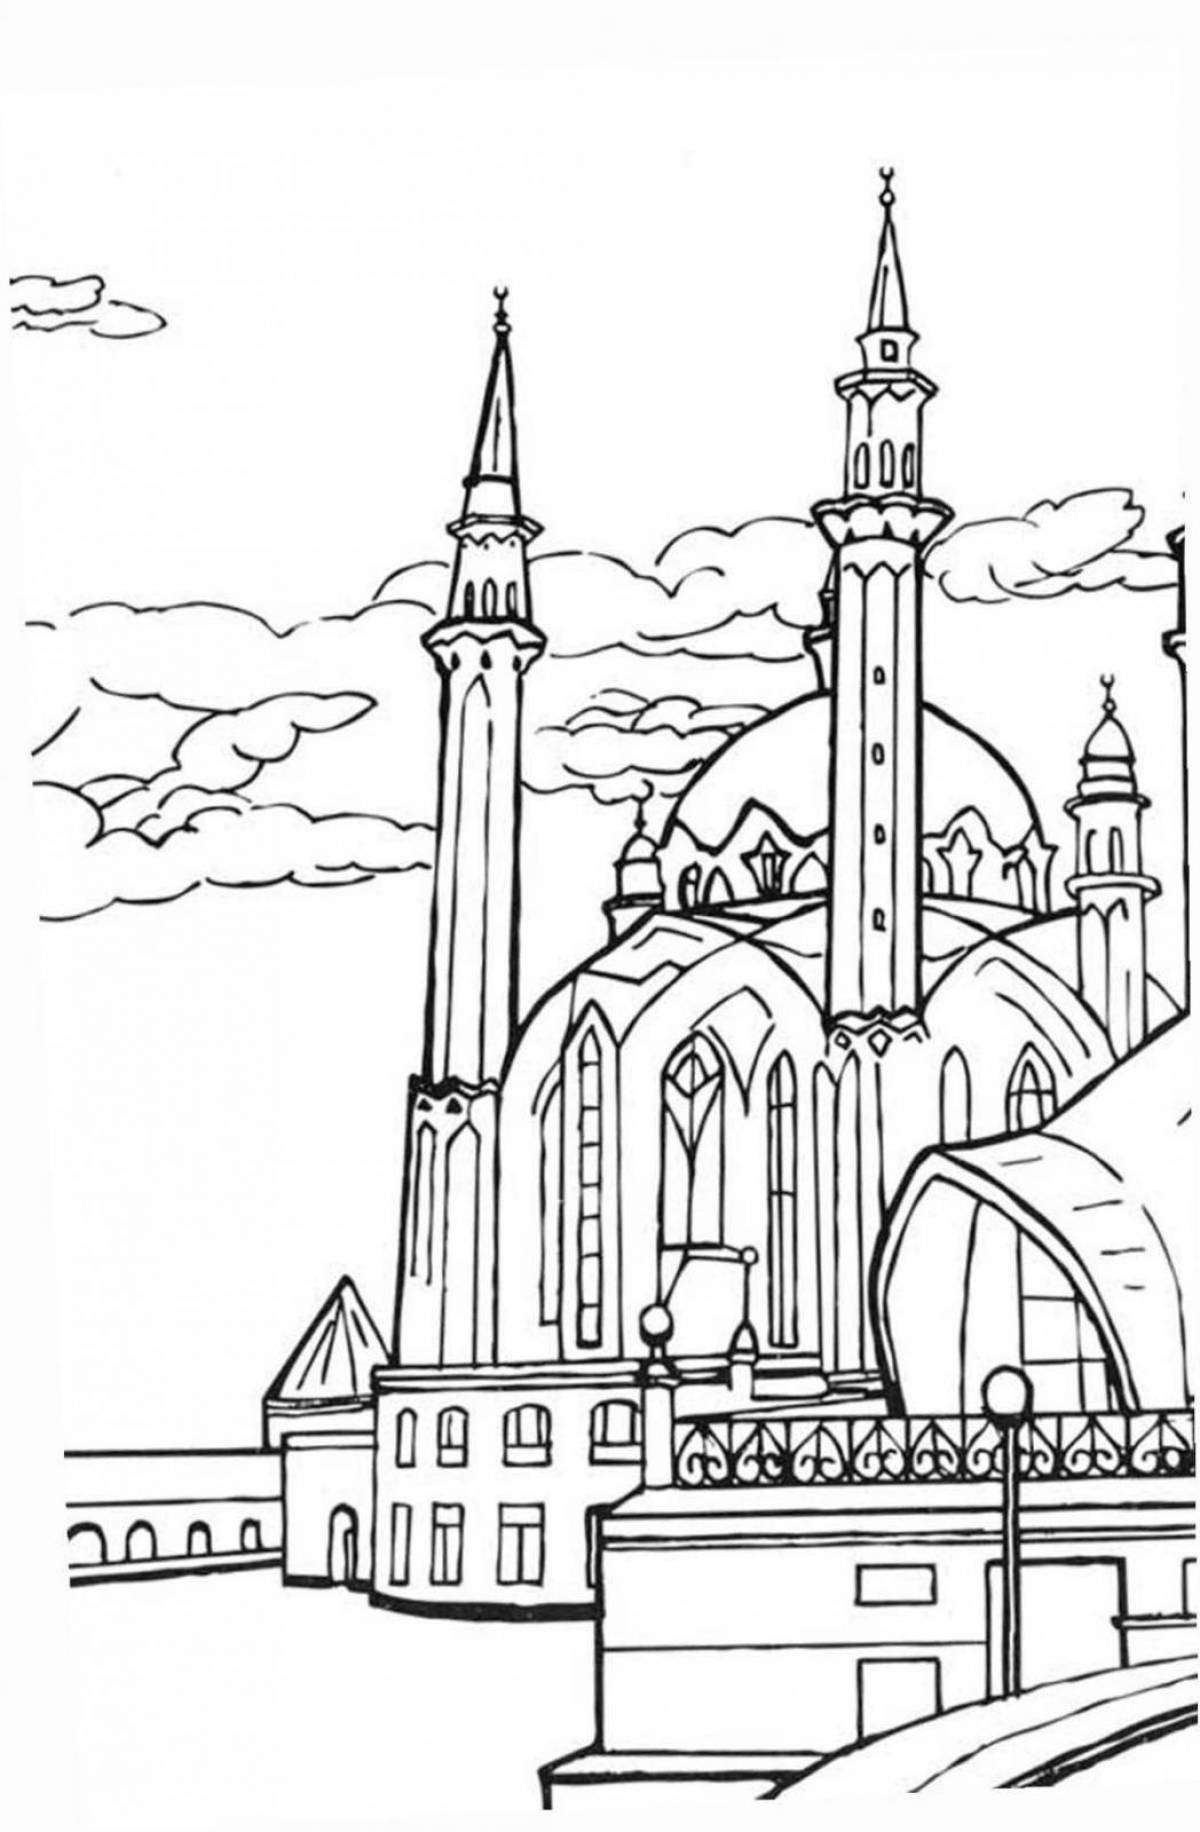 Amazingly cool sharif coloring book